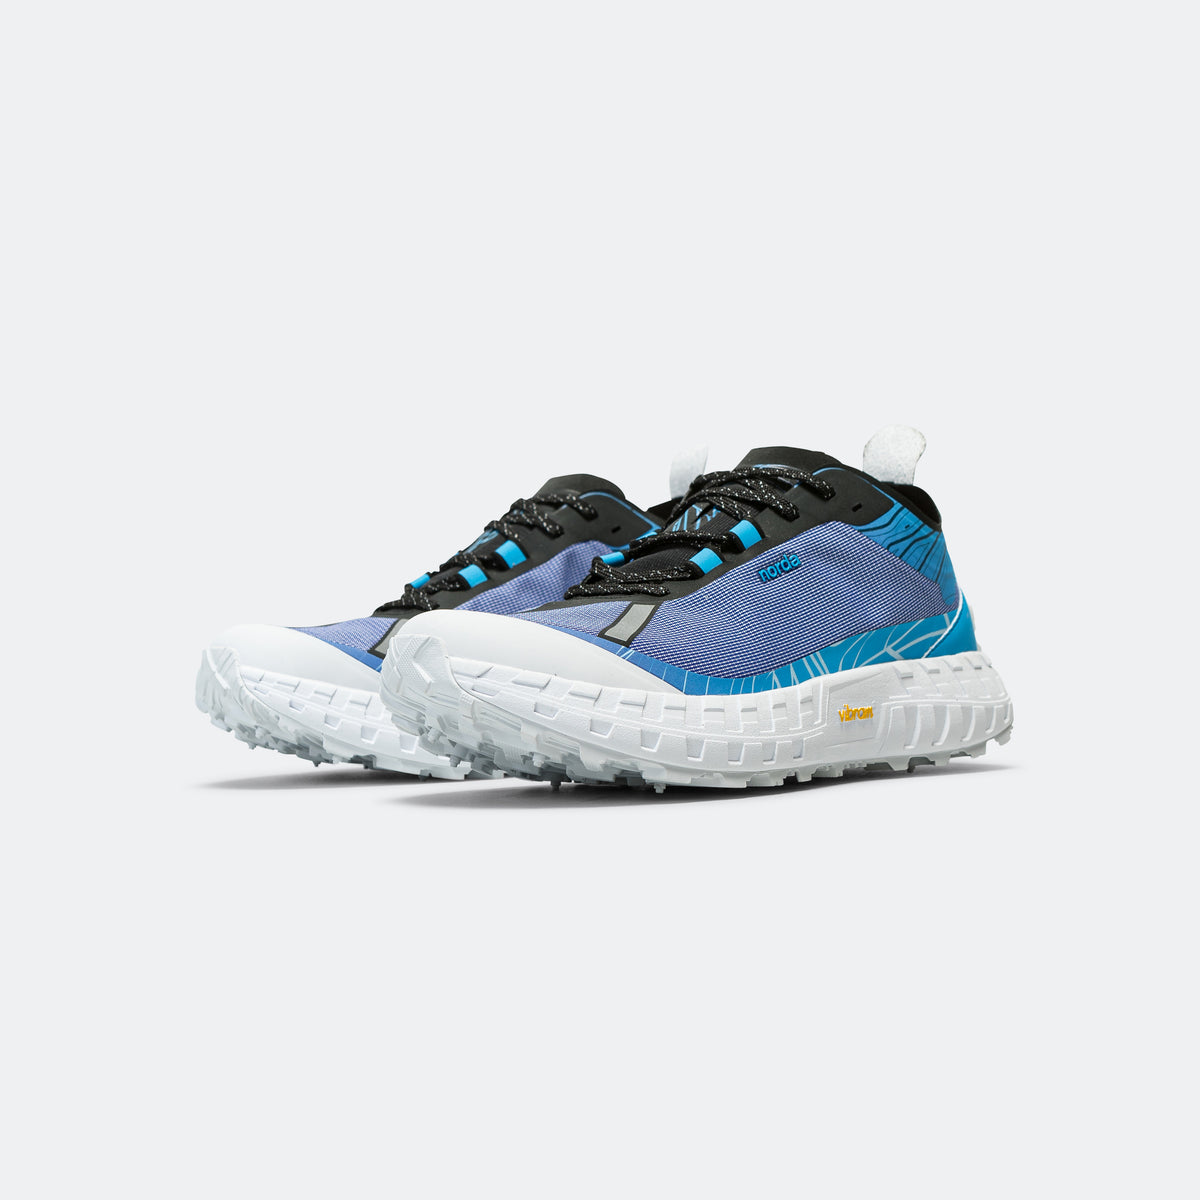 norda™ 001 - RZ Blue | Up There Athletics